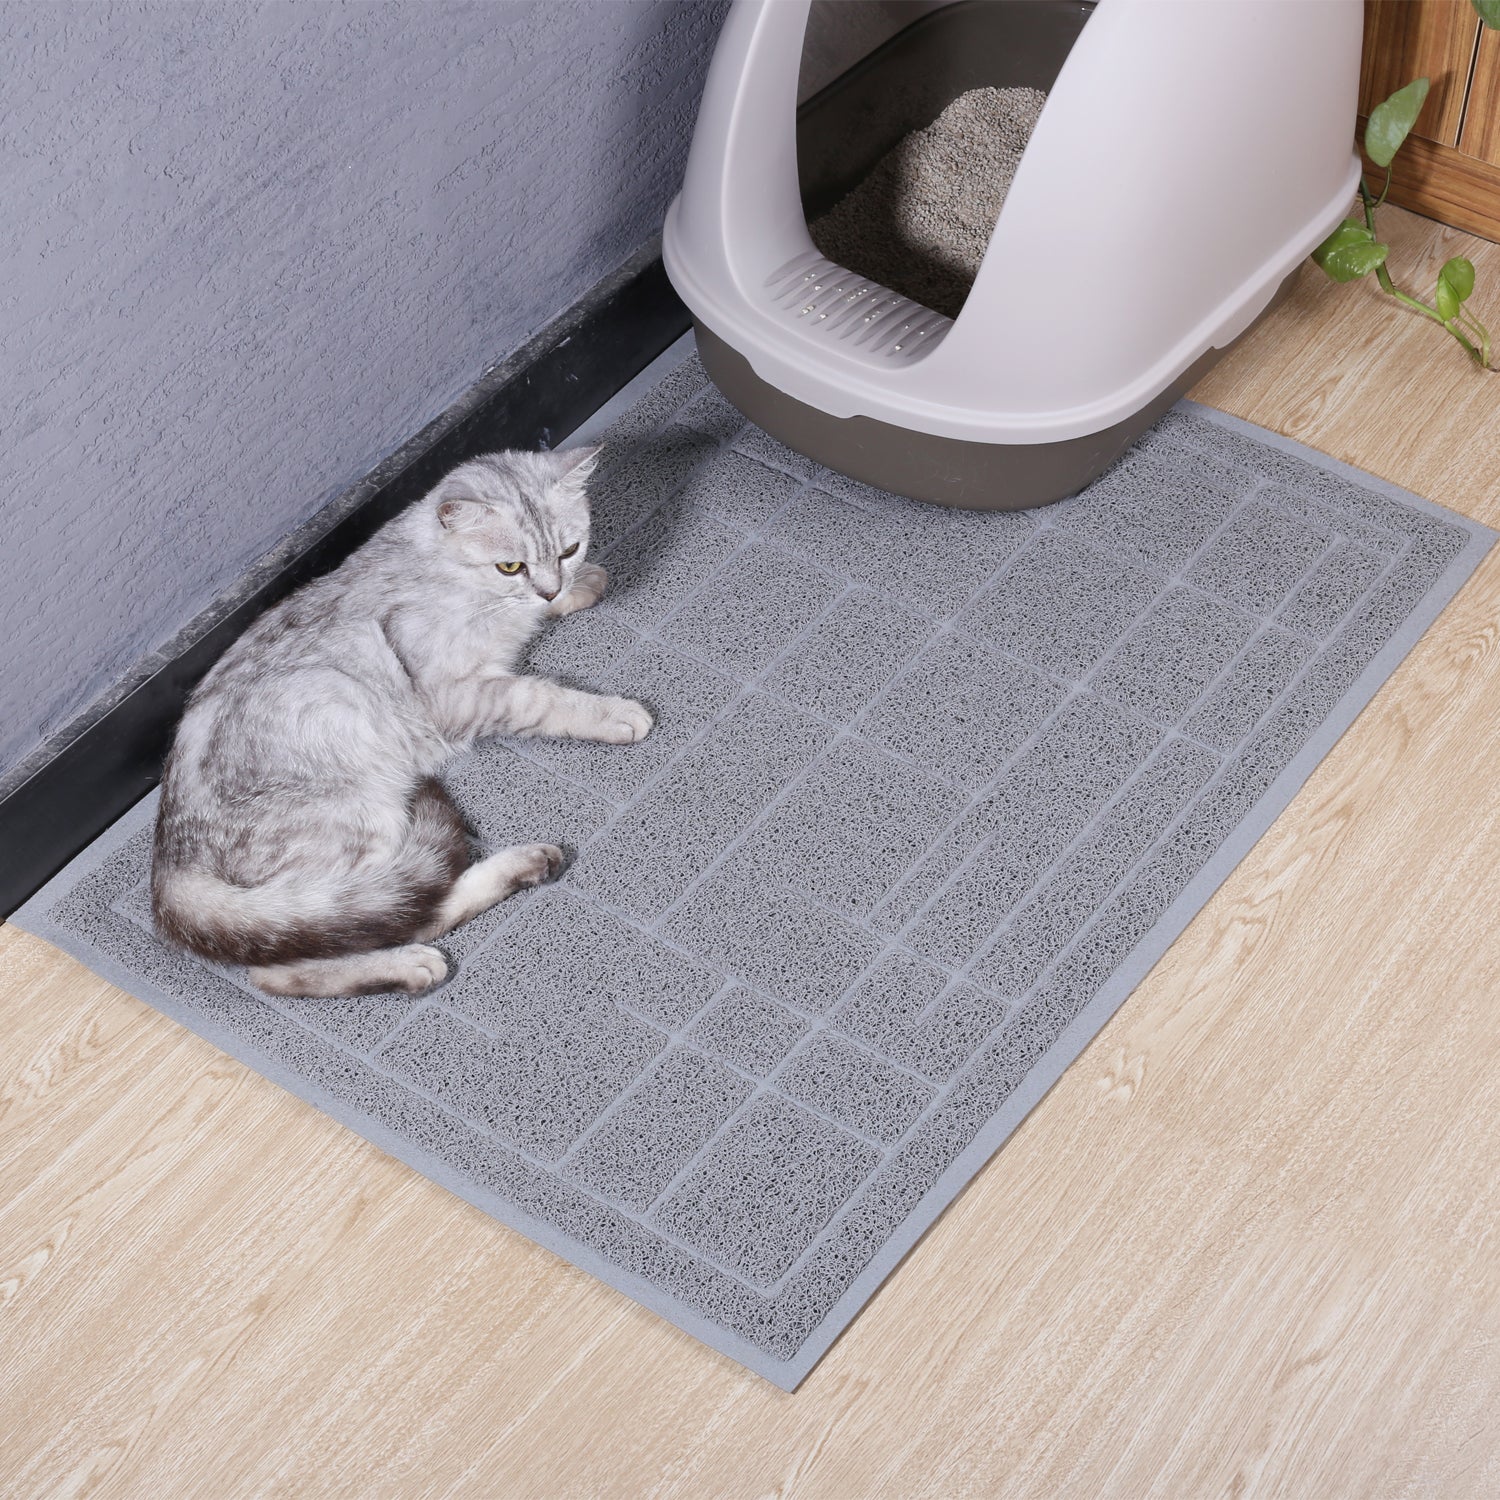 Vivaglory Cat Litter Mats, 31× 20 Large or 35× 25 Extra Large